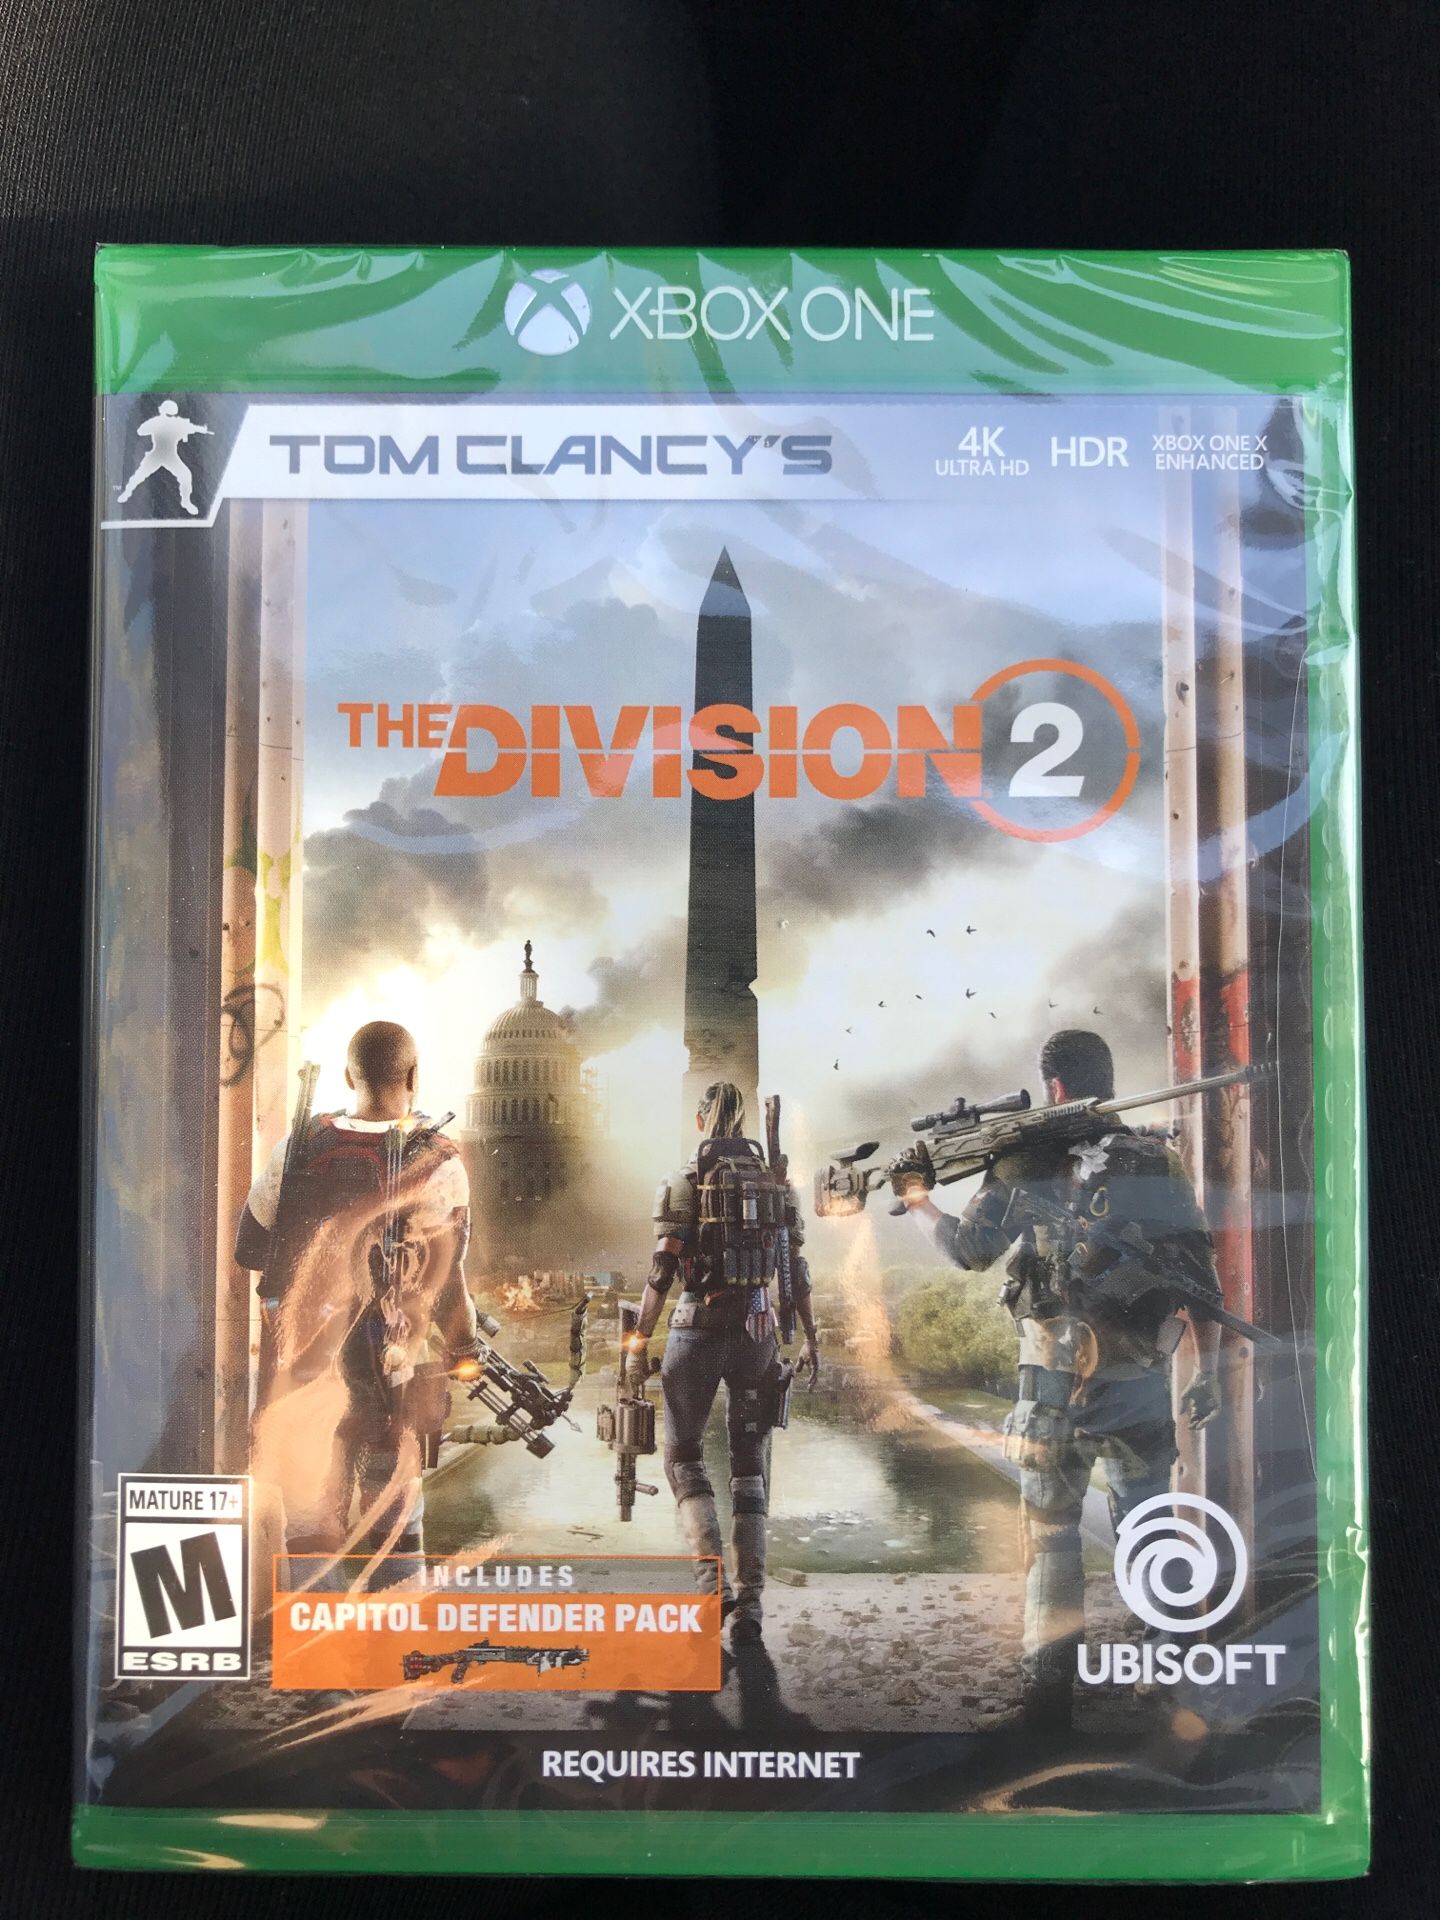 BRAND NEW Tom Clancy’s The Division 2 XBox One Game